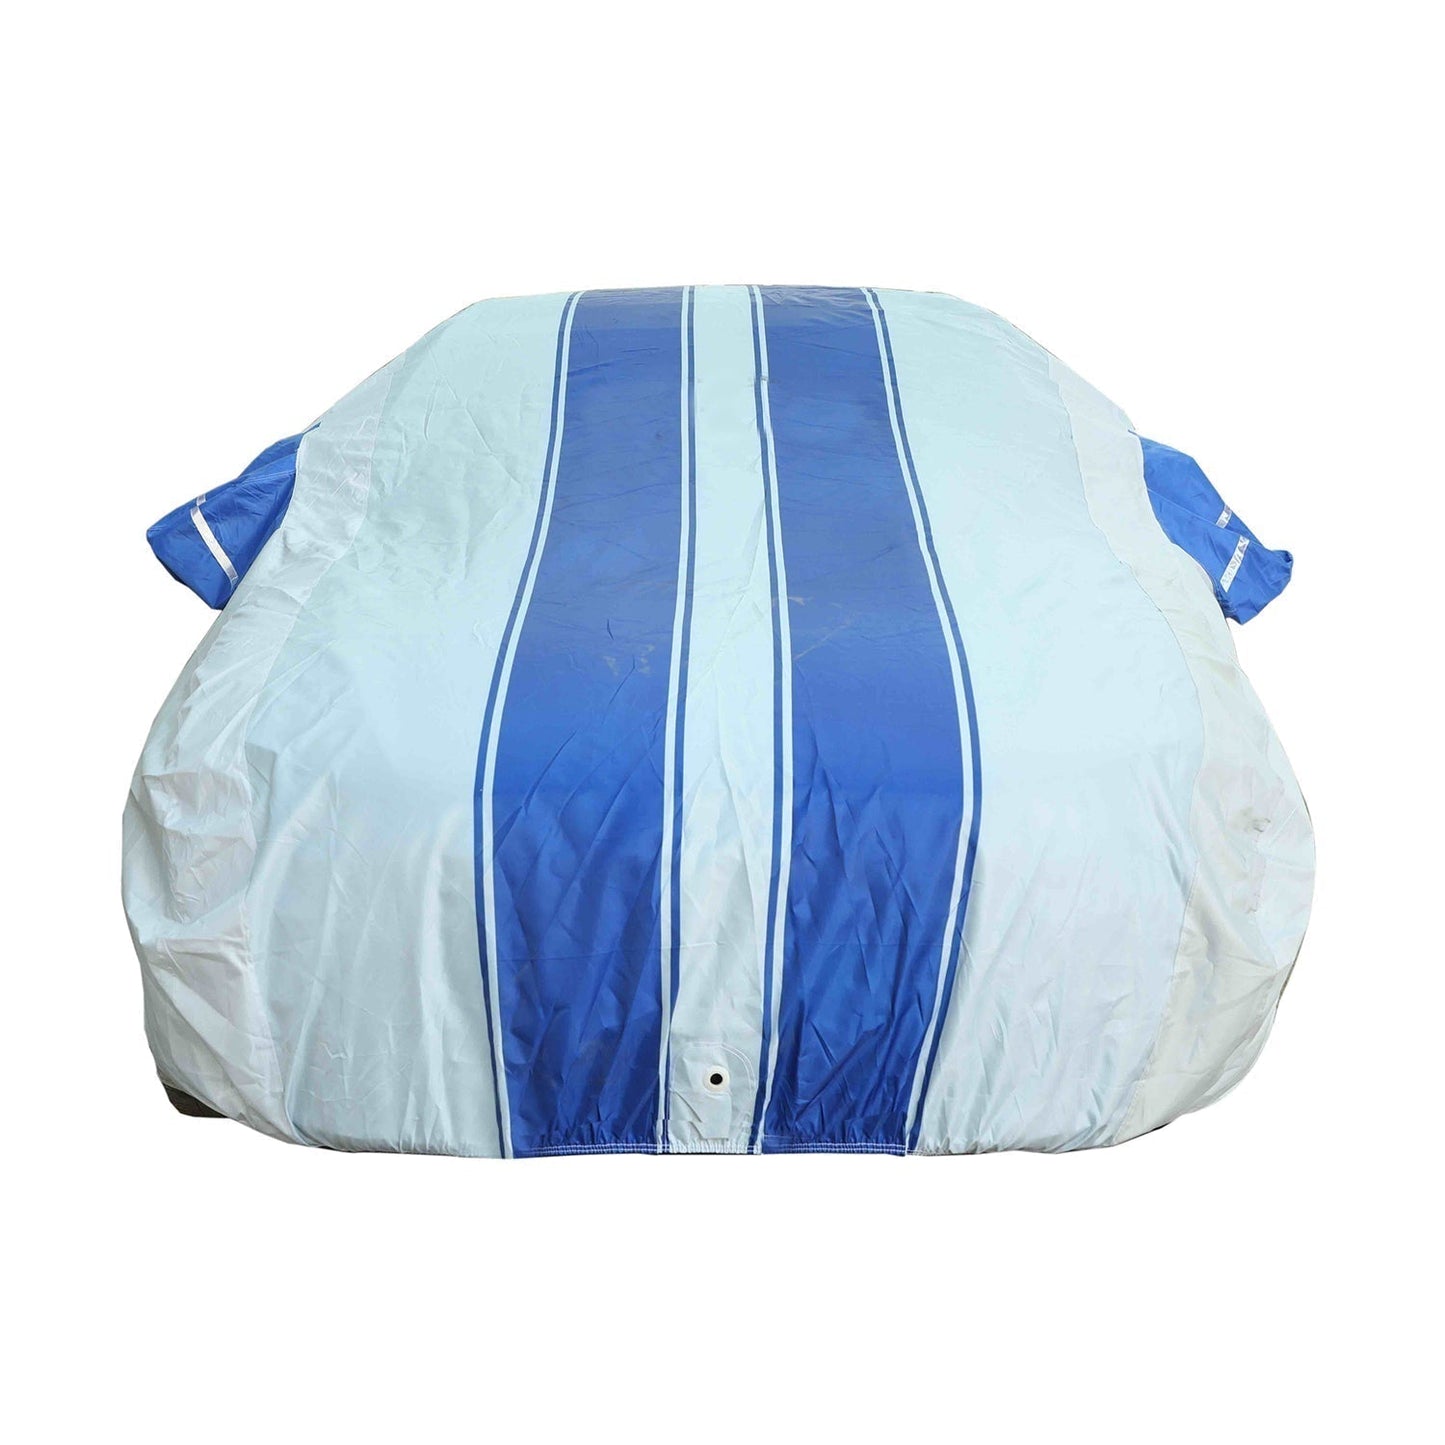 Oshotto 100% Blue dustproof and Water Resistant Car Body Cover with Mirror Pockets For Volkswagen Vento